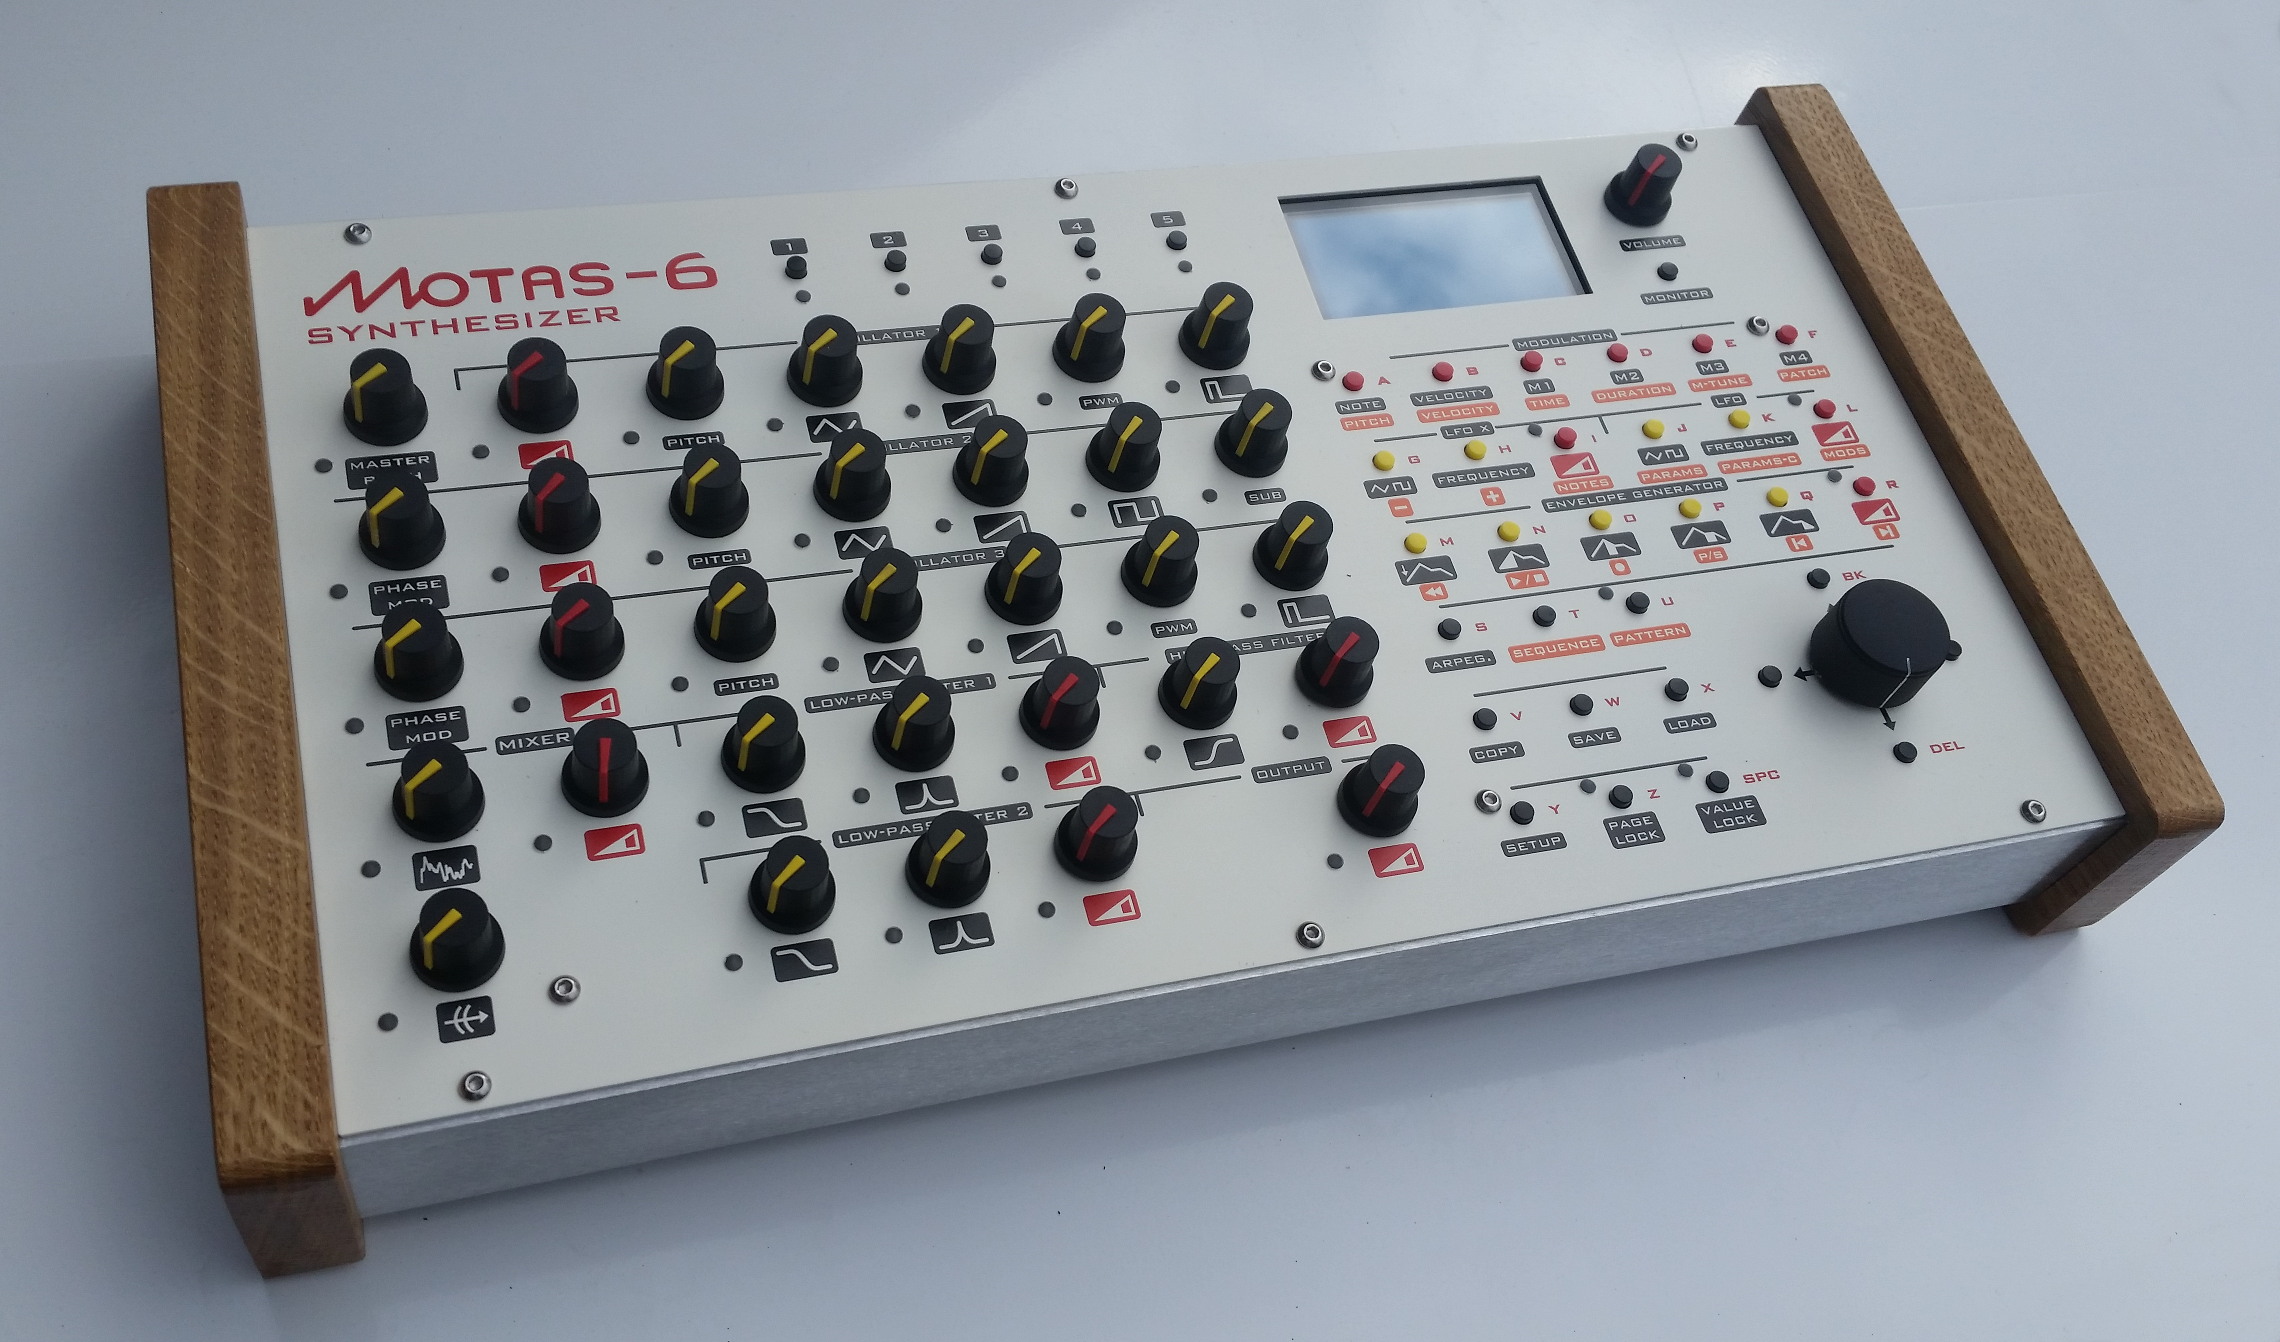 Motas-6 image in white painted finish